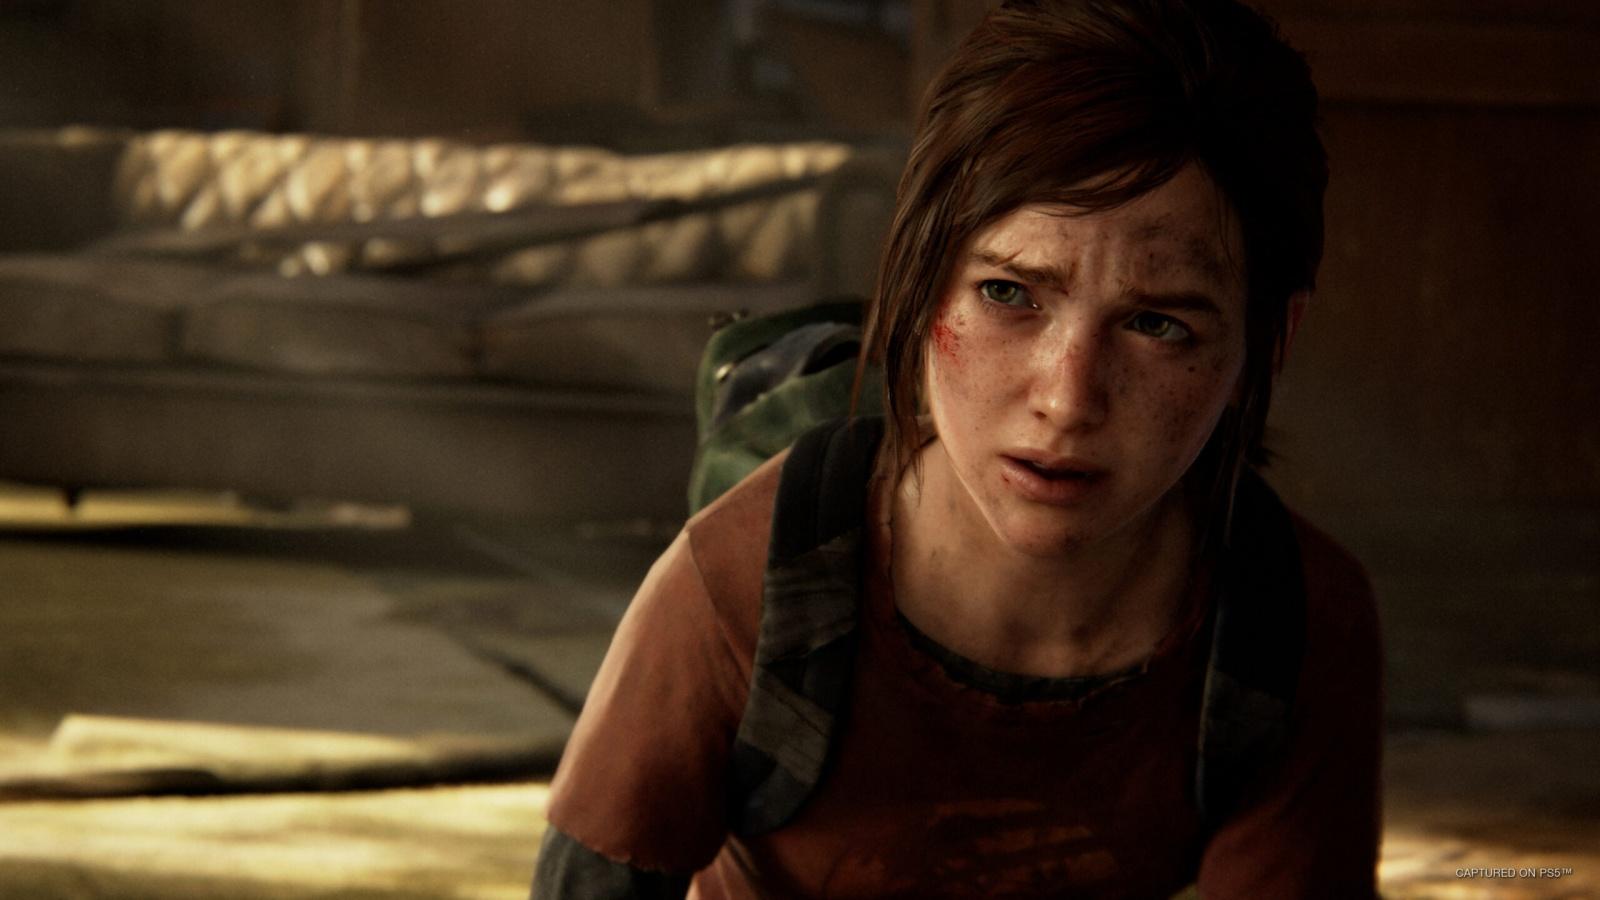 The Last of Us Part 1 v1.1 Patch Released, Now Steam Deck Verified